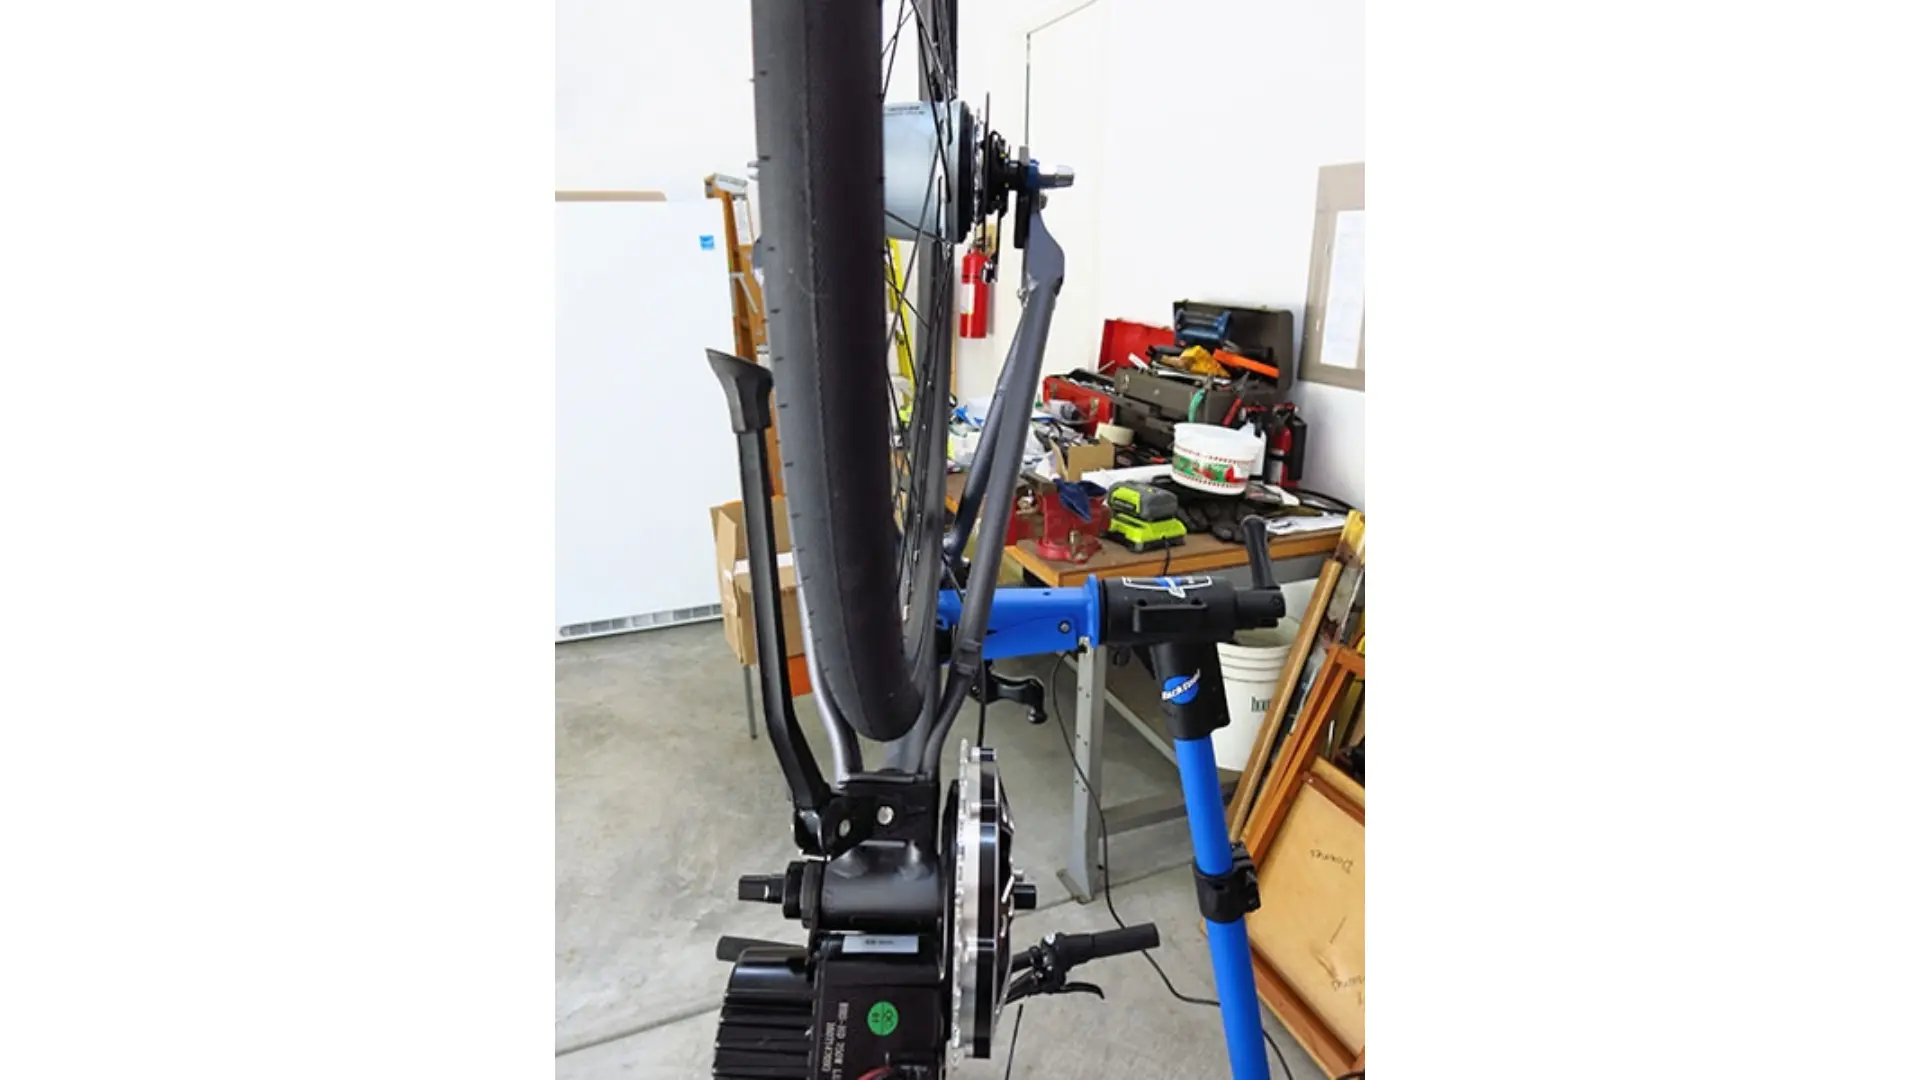 What Can You Do if Any Important Components of Your Ebike Have Gotten Wet From Rain